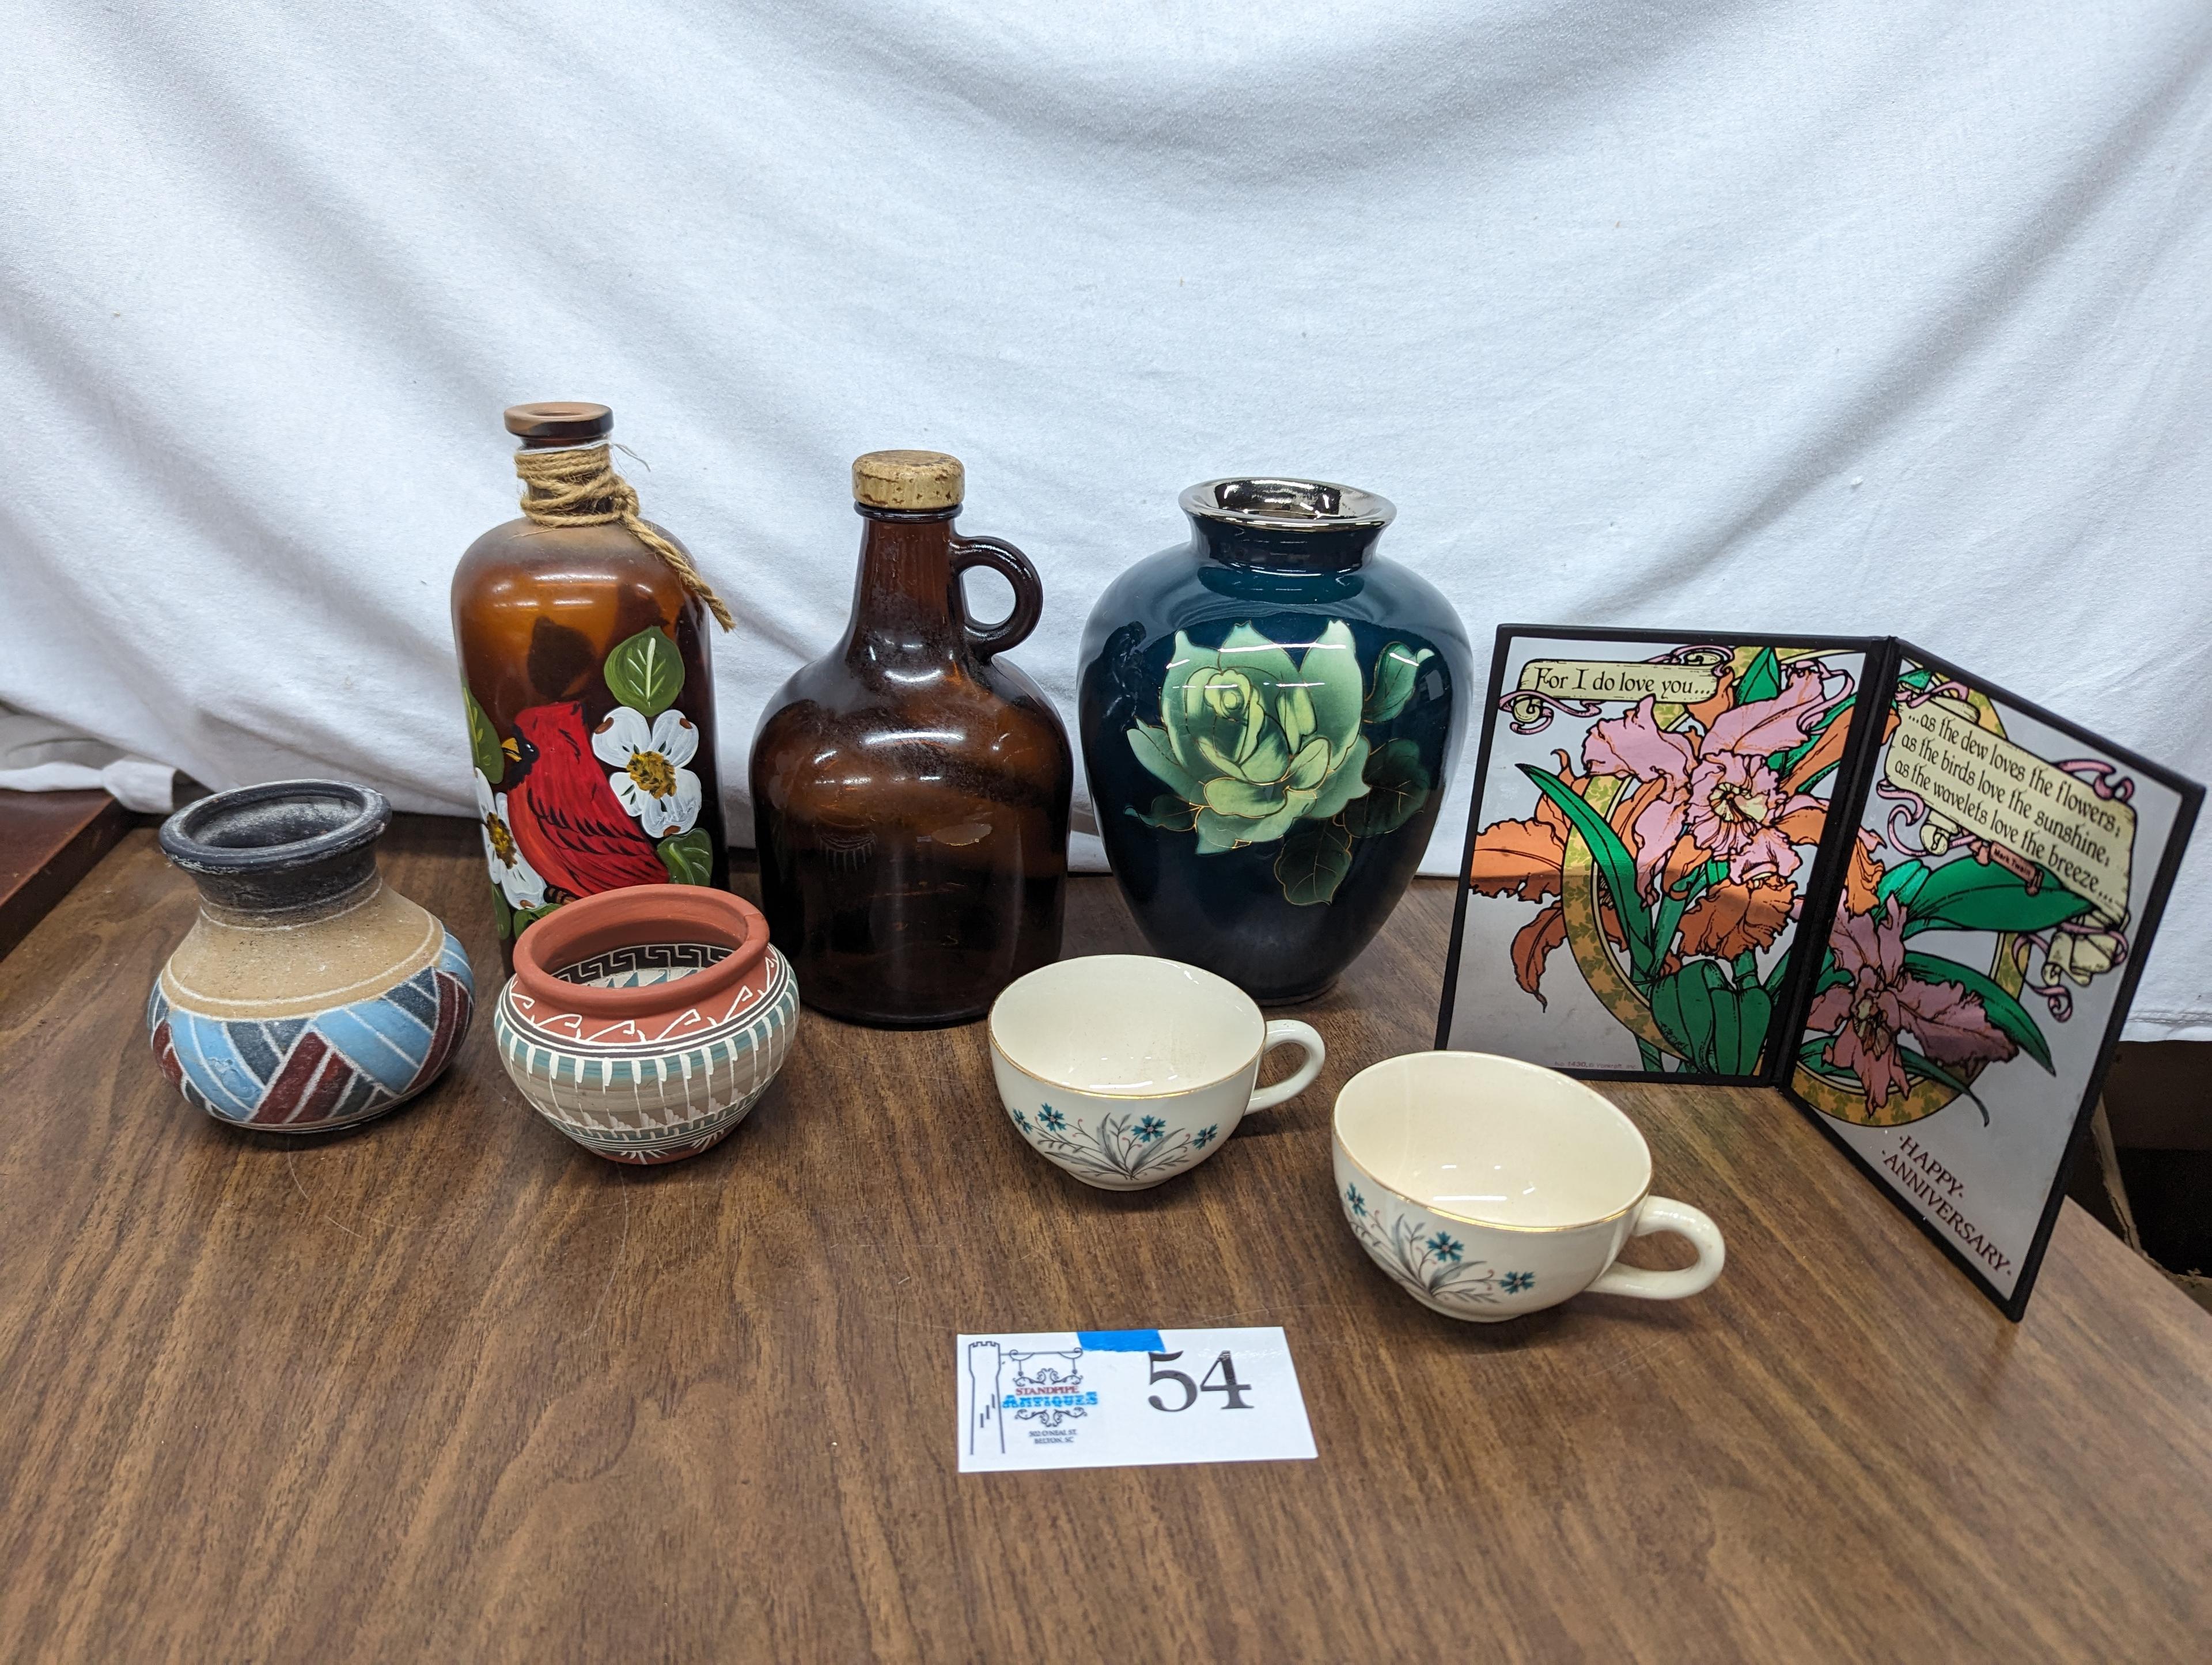 Vases, Jugs, Mini Stained Glass